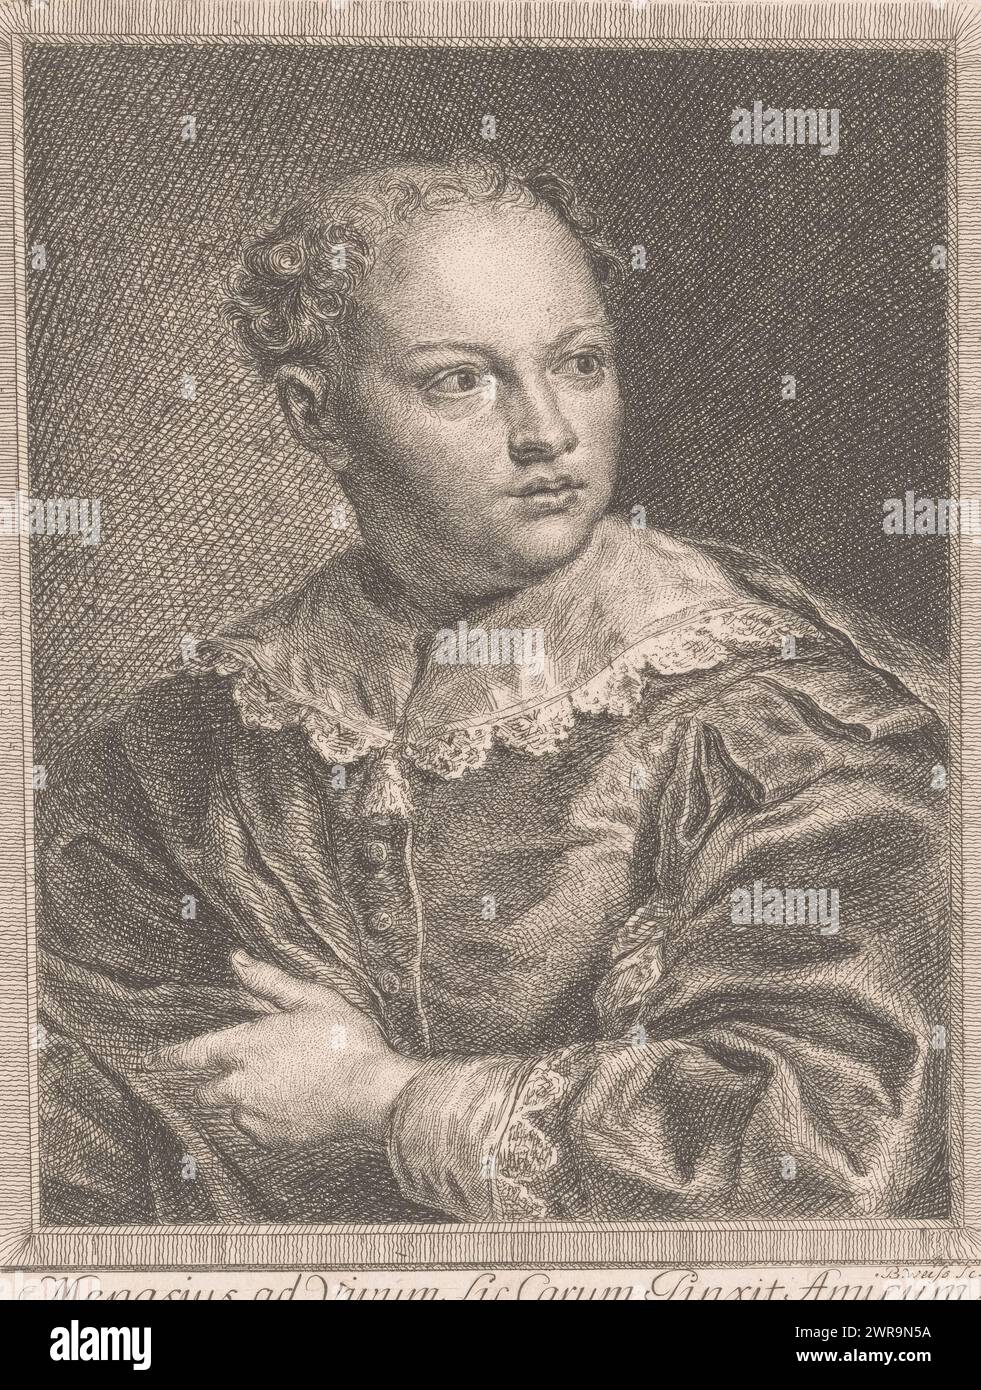 Portrait of Pedro Rodríguez de Campomanes, print maker: Bartholomäus Ignaz Weiss, after painting by: Anton Raphael Mengs, Germany, c. 1750 - 1814, paper, etching, height 180 mm × width 135 mm, print Stock Photo